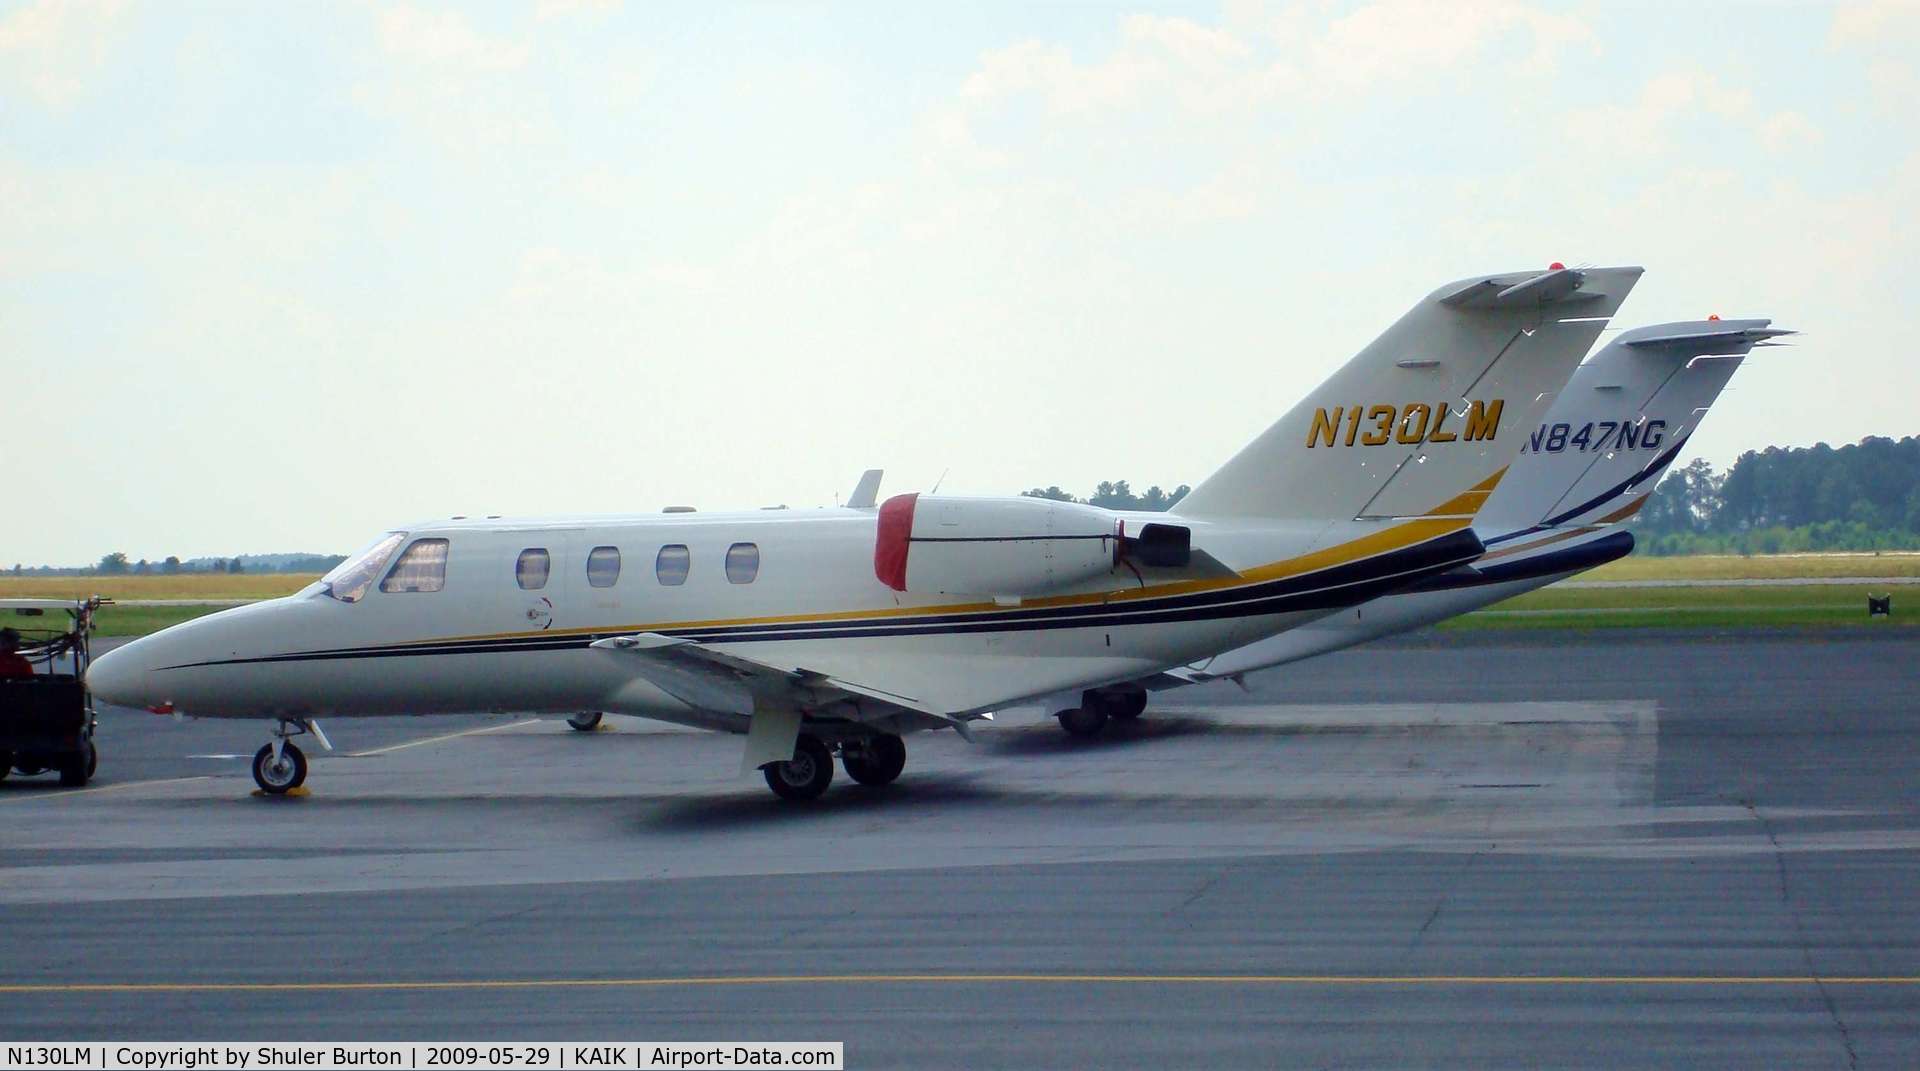 N130LM, 1997 Cessna 525 CitationJet C/N 525-0214, on ramp all buttoned up